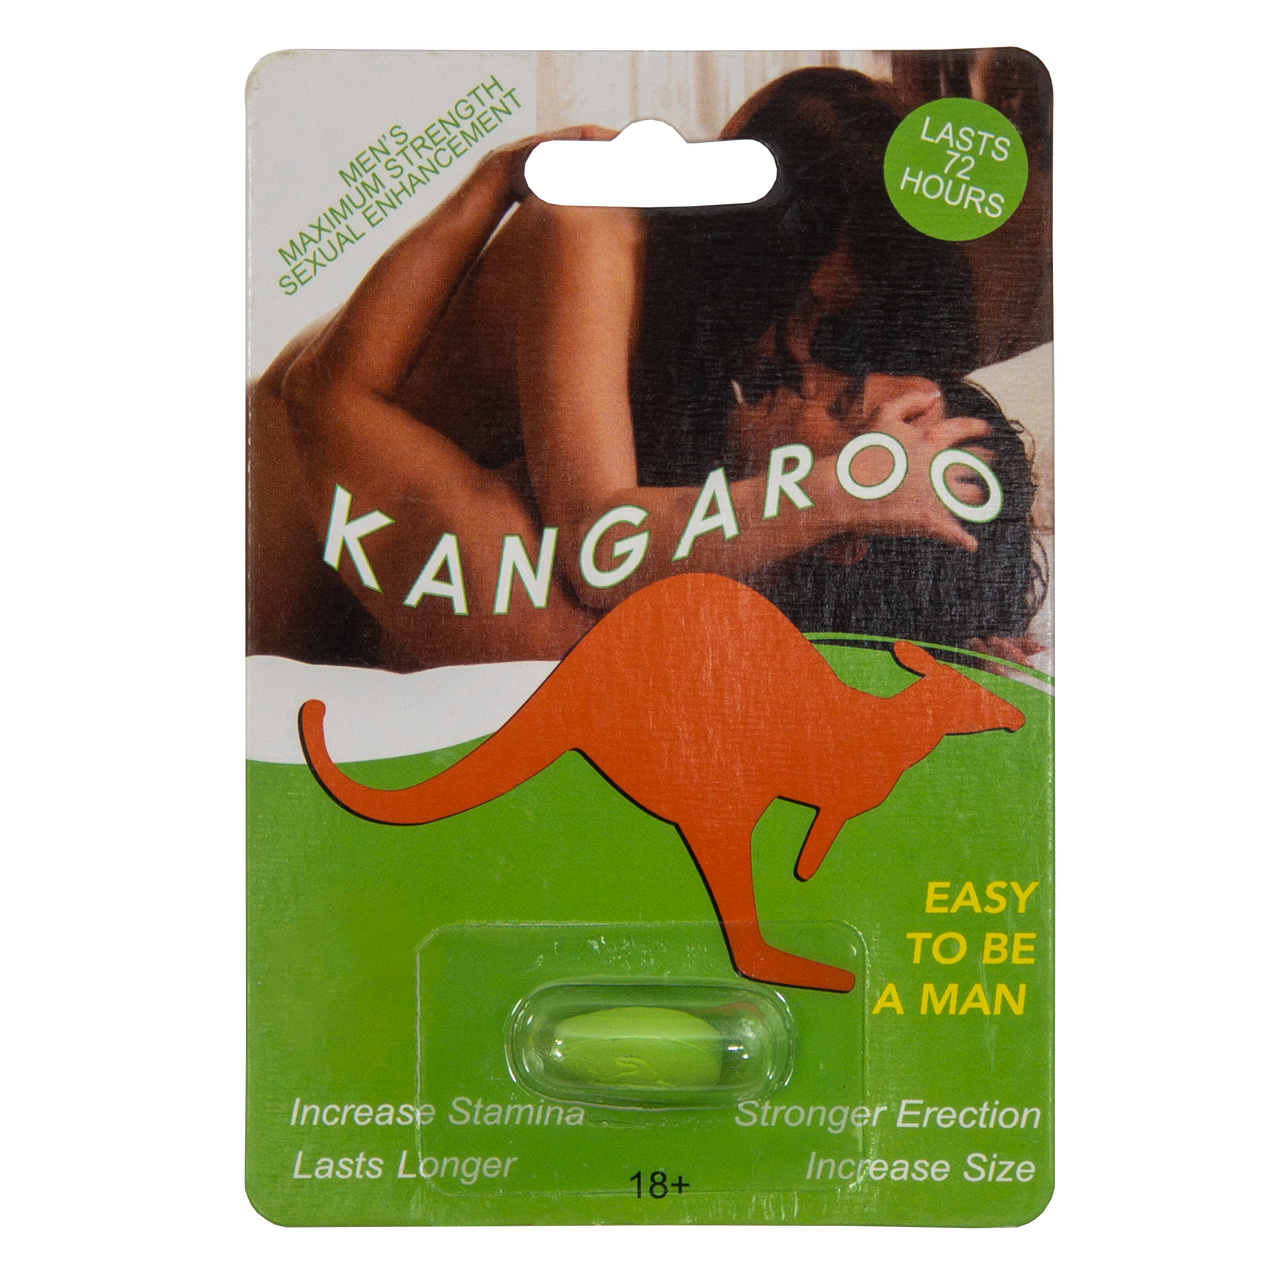 Our Kangaroo sex pill line includes pills for both men and women and can help increase your stamina while enhancing intimacy. Check it out today. 